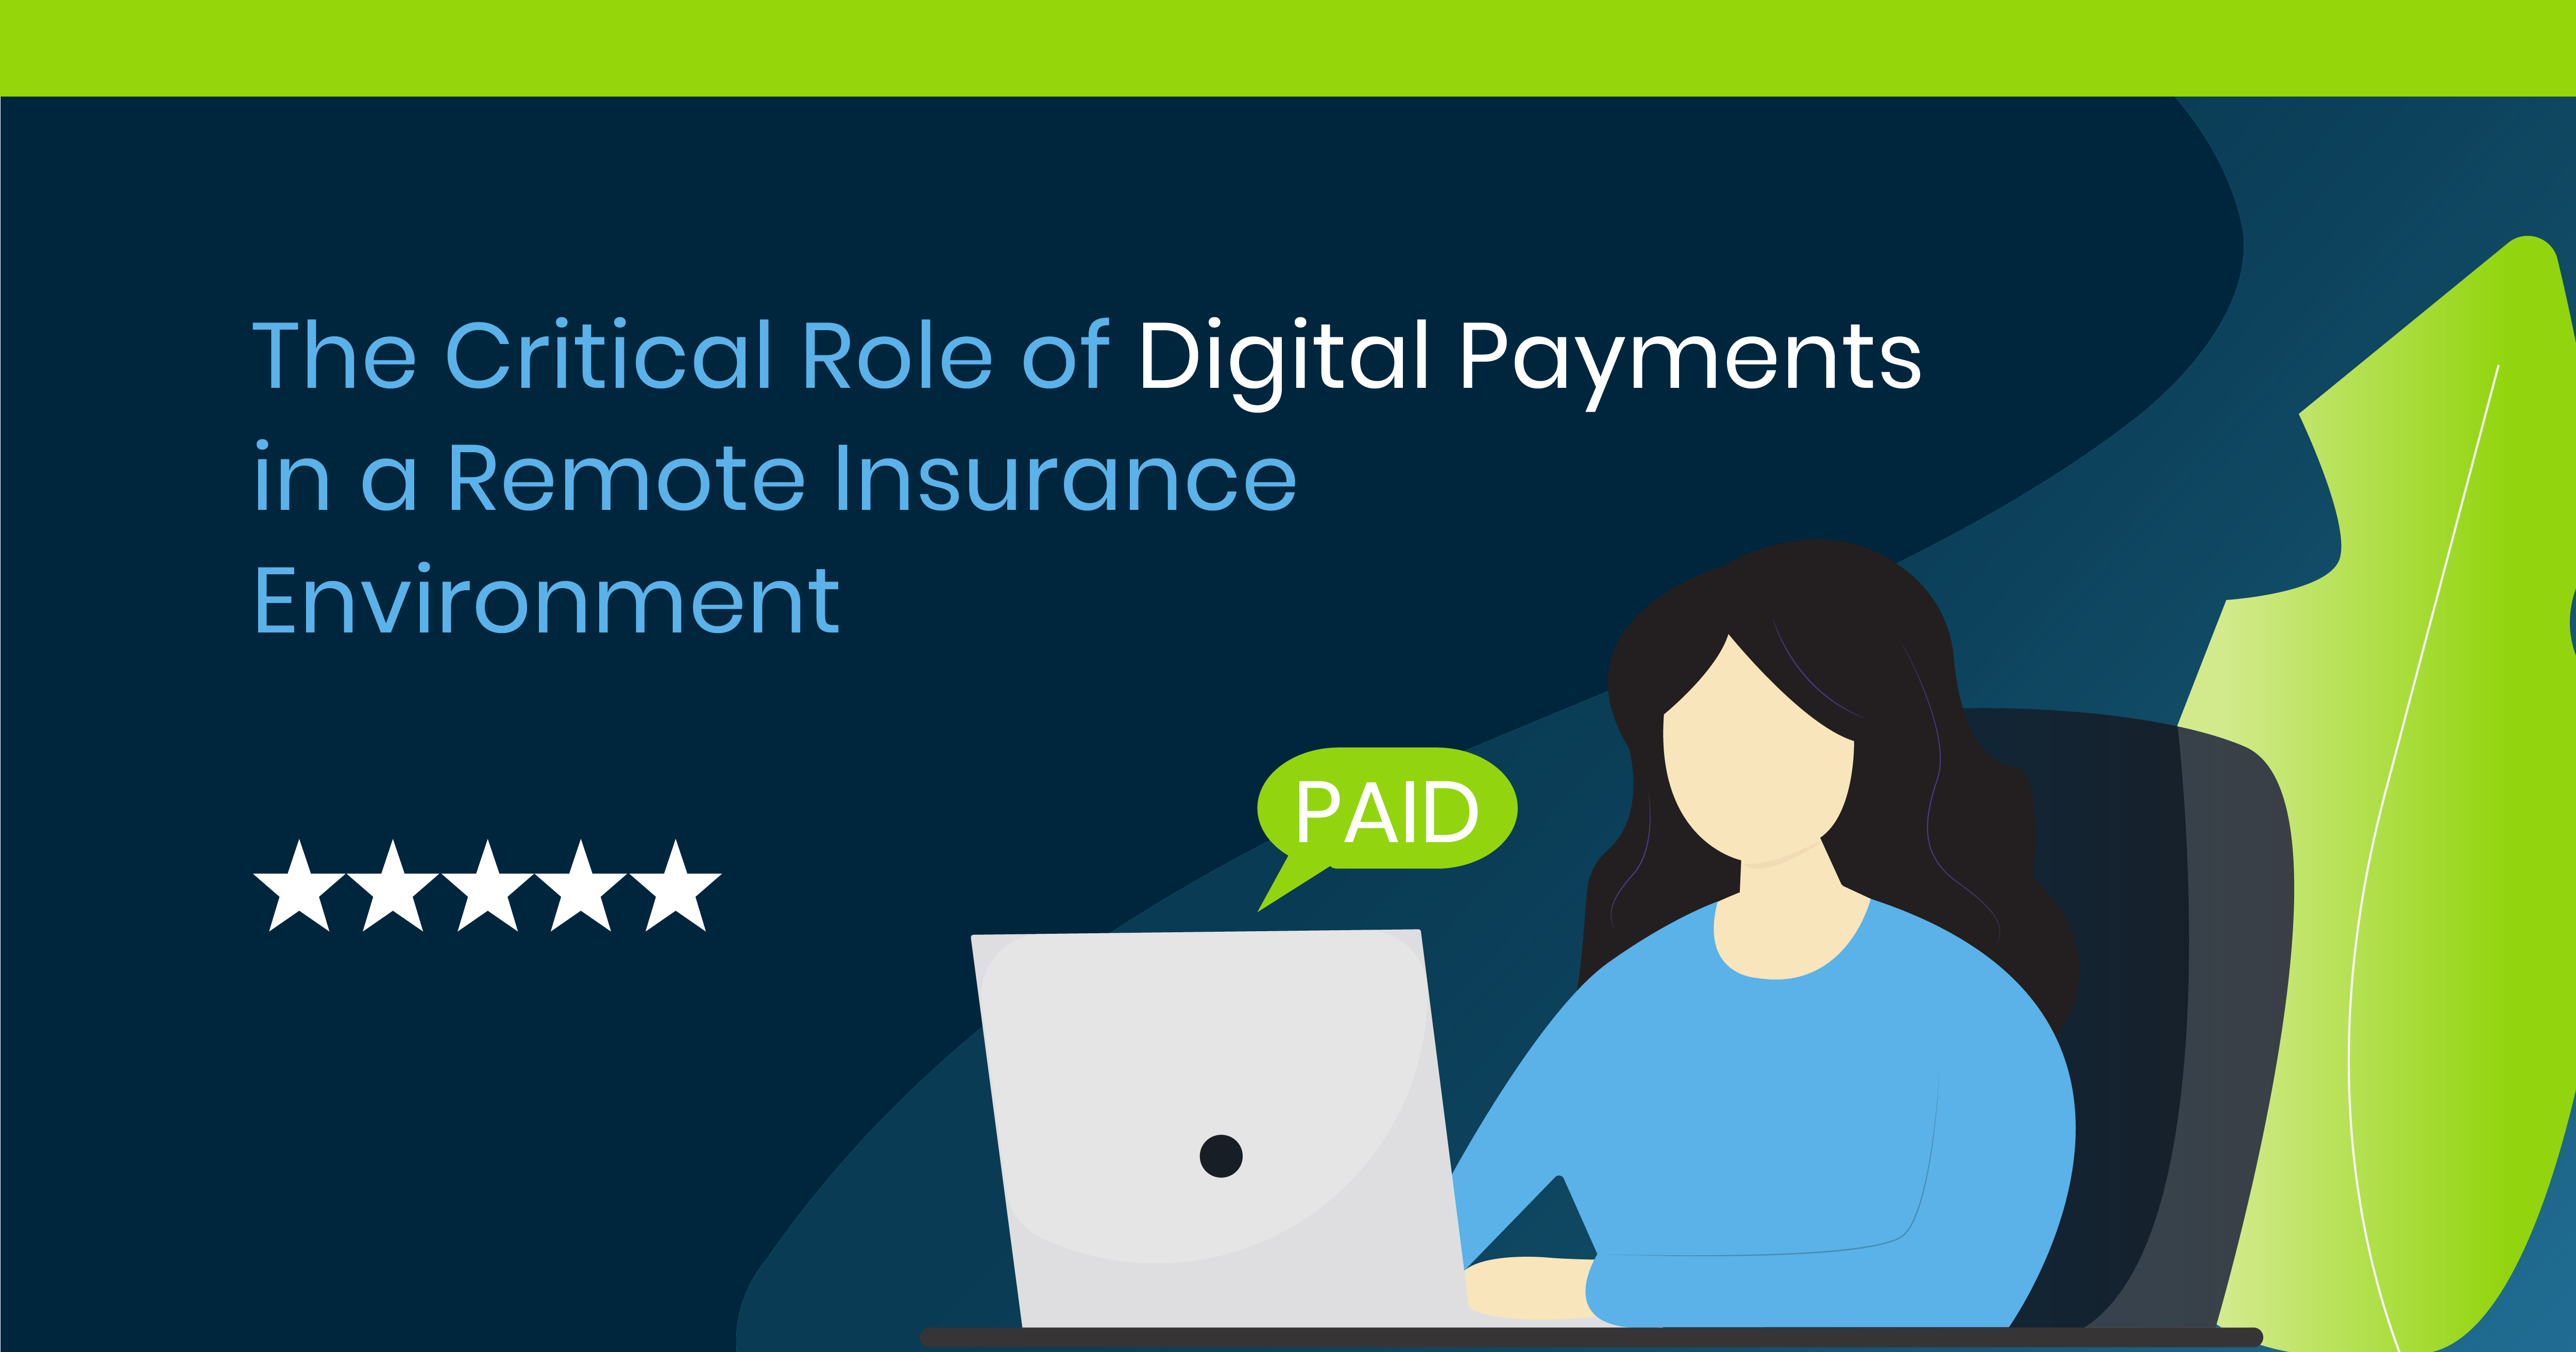 The Critical Role of Digital Payments in a Remote Insurance Environment Illustration